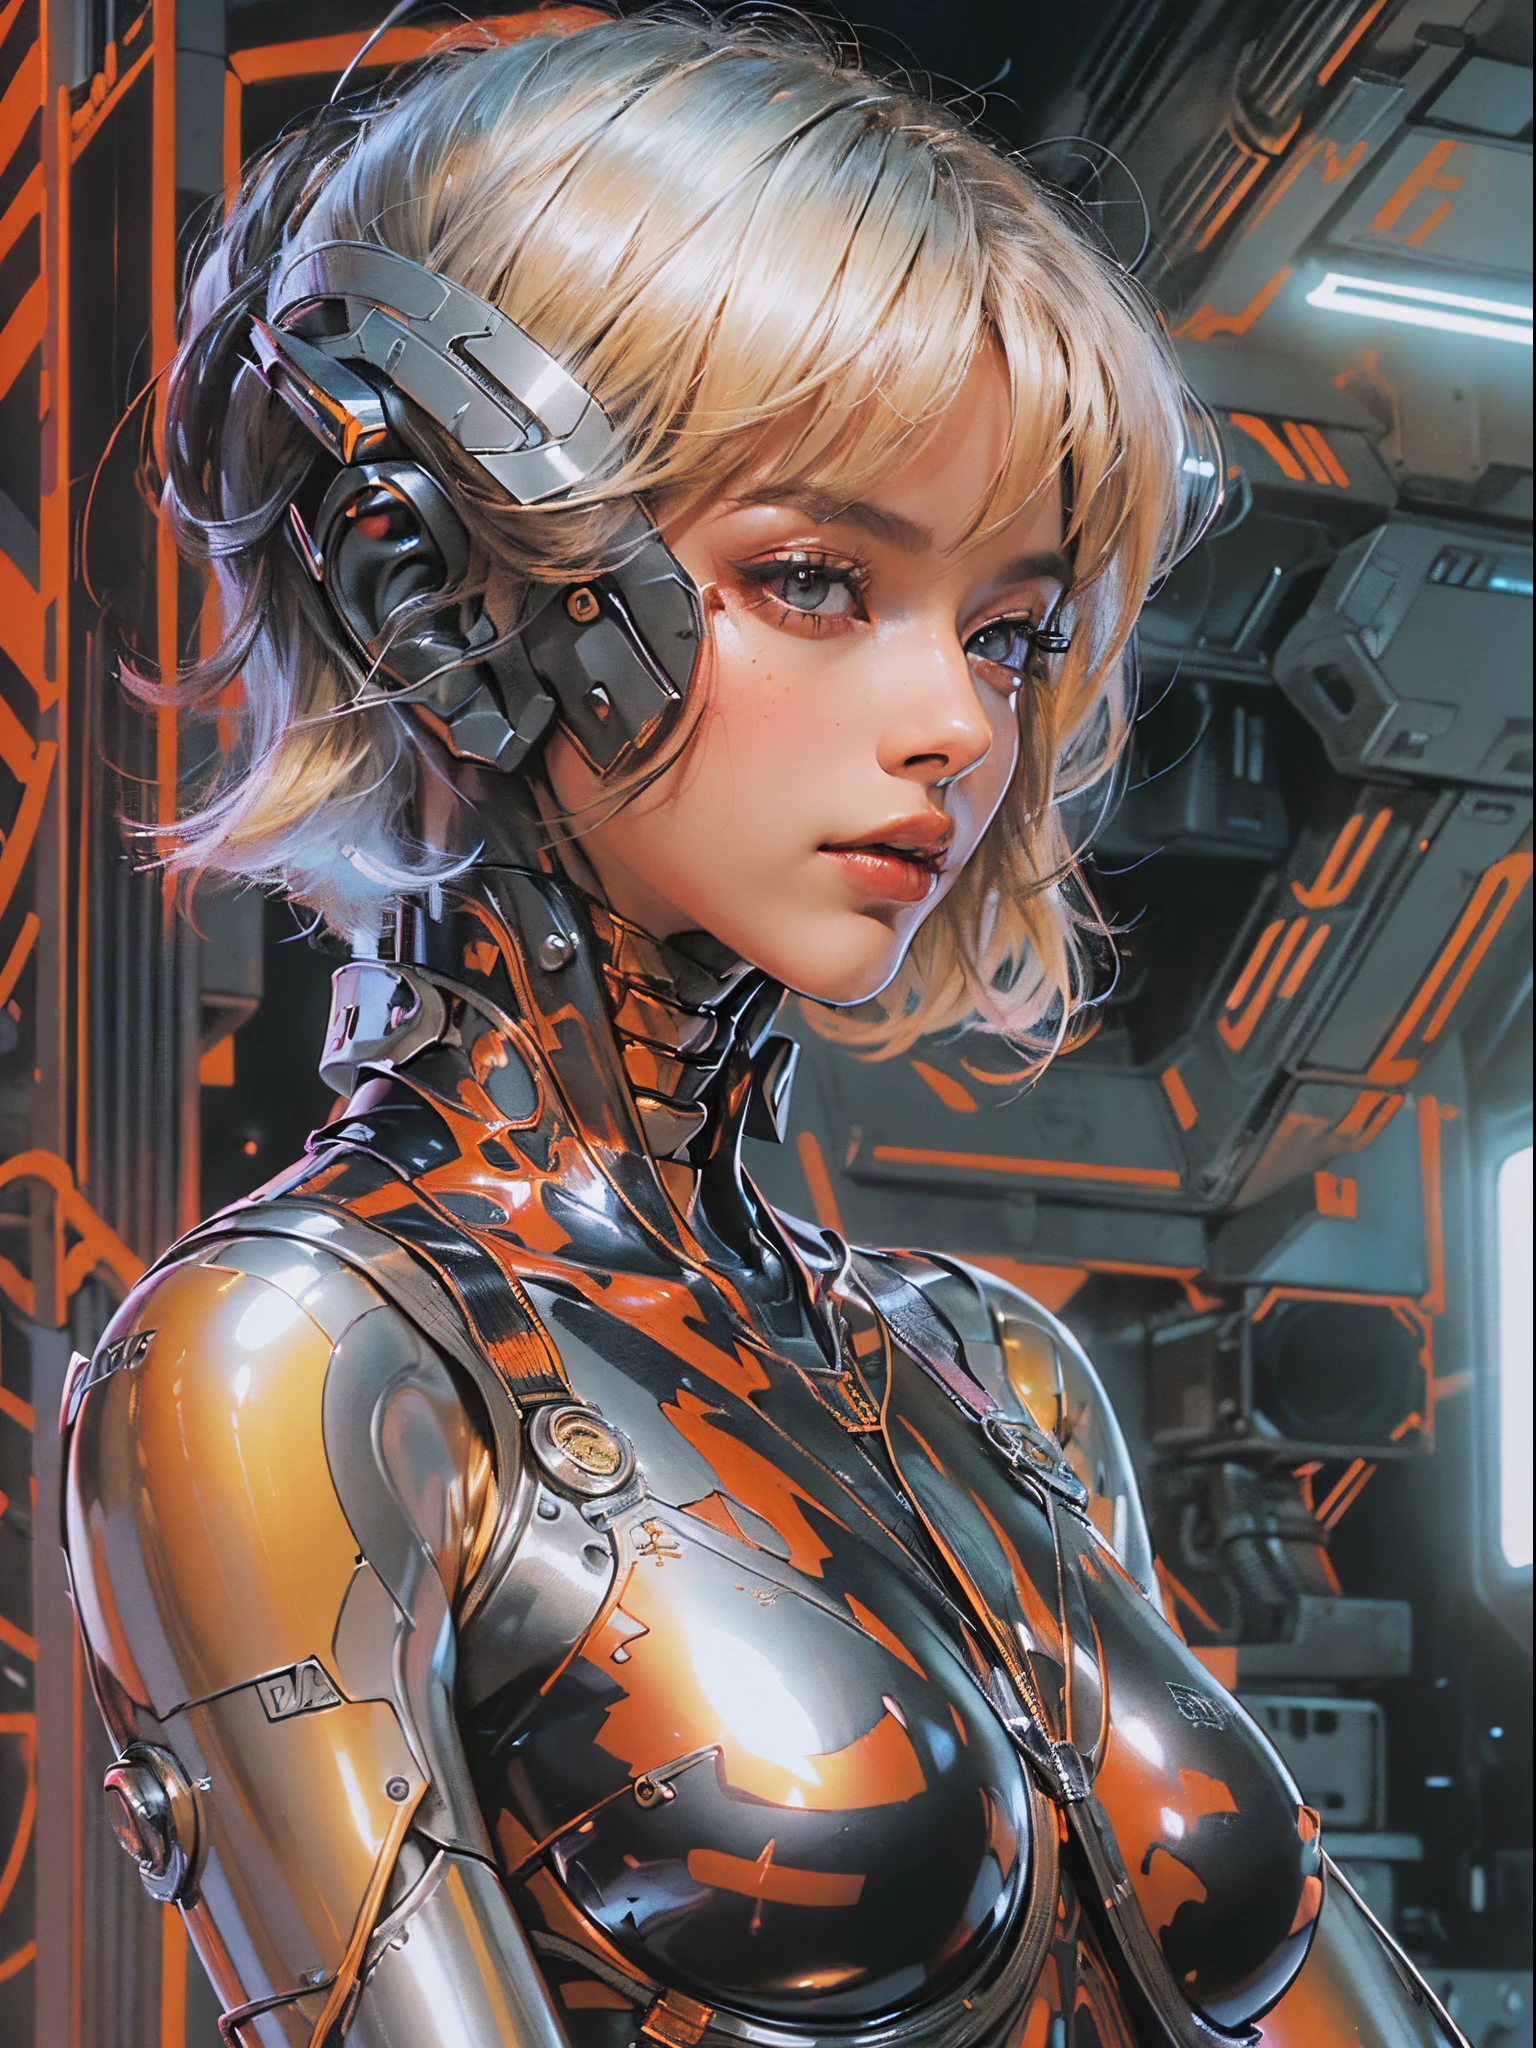 (((Woman))), (((best qualityer))), (((​masterpiece))), (((Gynoid))), (((1girl))), (((metal skin))), (((Neon Genesis Evangelion)), (((1girl))), A futuristic gynoid game girl with high-tech exo-skeleton and a complex look, 18 year old woman with perfect body, clean  face, ((( tight clothes in metallic colors ))), (((black look with red and white checkered print ))), Quase nova no estilo selvagem urbano de Hajime sorayama para a capa da revista Heavy Metal, Spectacular futuristic graphics, Minimum clothing, (((metallic black body))), (((from the knee up))), ((( short hair cuts ))), a spaceport in the background, (((self-contrast of the character with the background))), Two-tone lighting, film granulation, Cyberworld, Acrylic Comix, sorayama